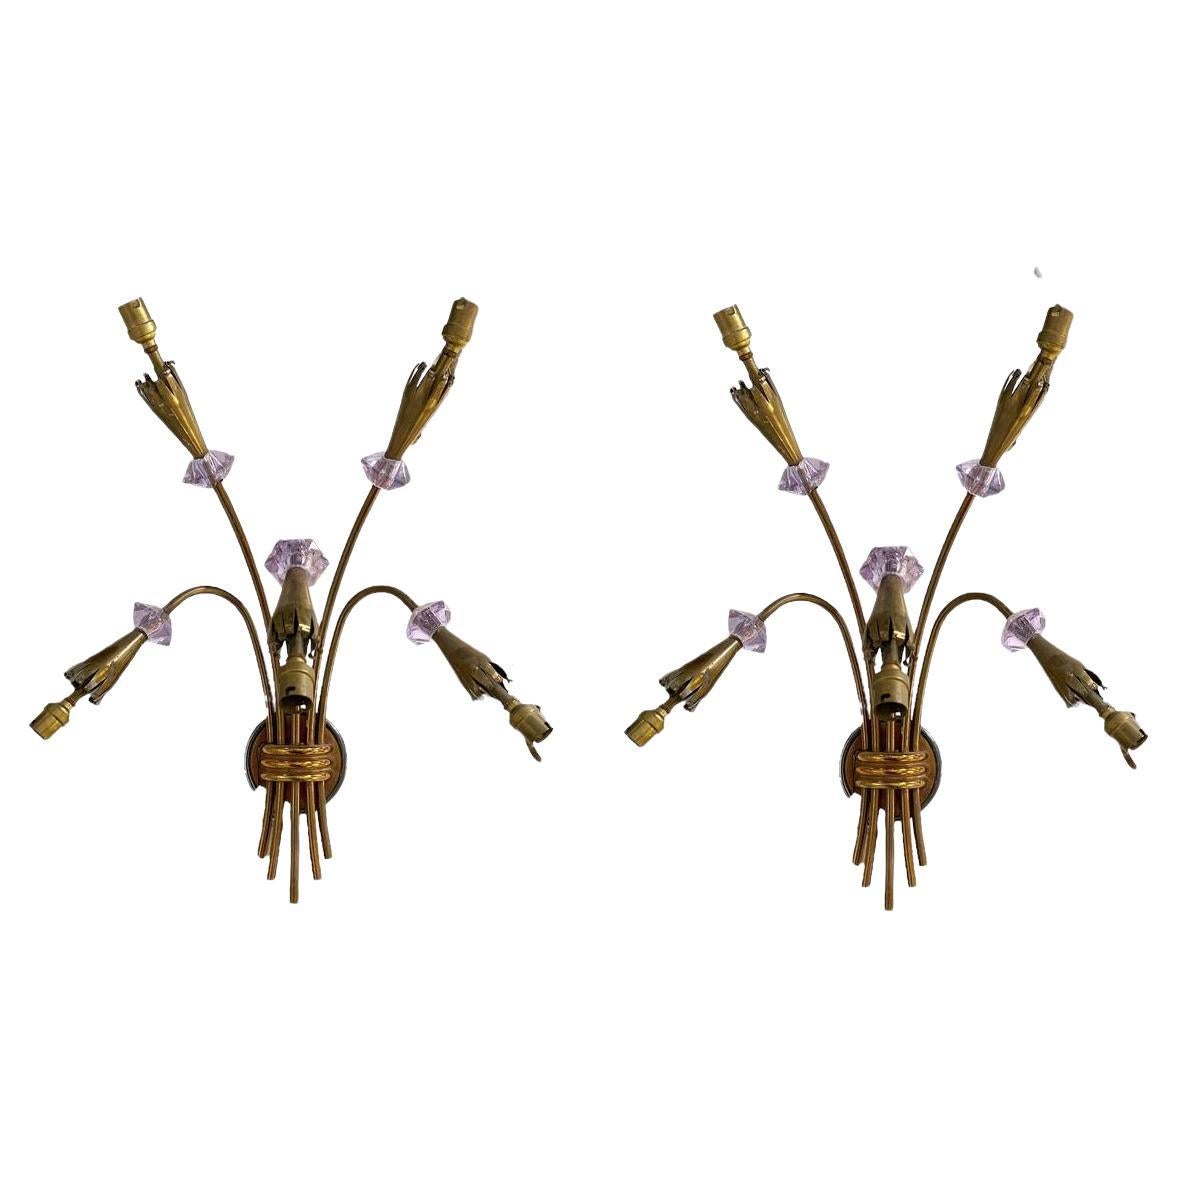 1930's French 5 Lights Tulips Sconces with Amethyst Crystals